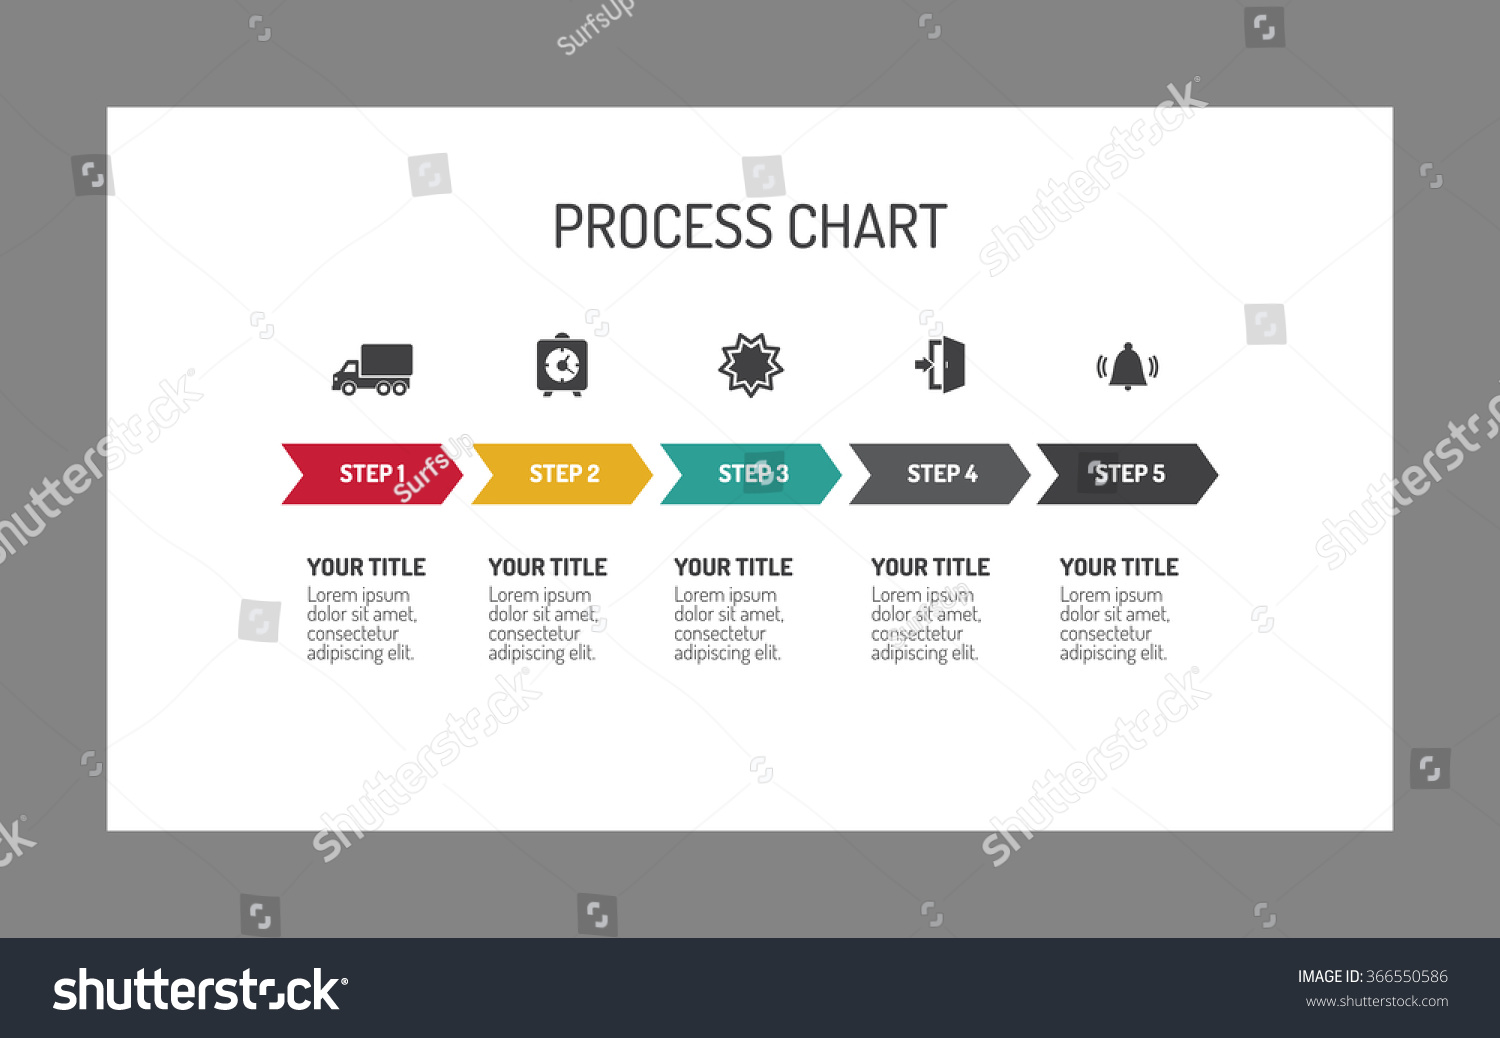 Five Step Workflow Process Chart Process Chart Business Infographic Riset 4729